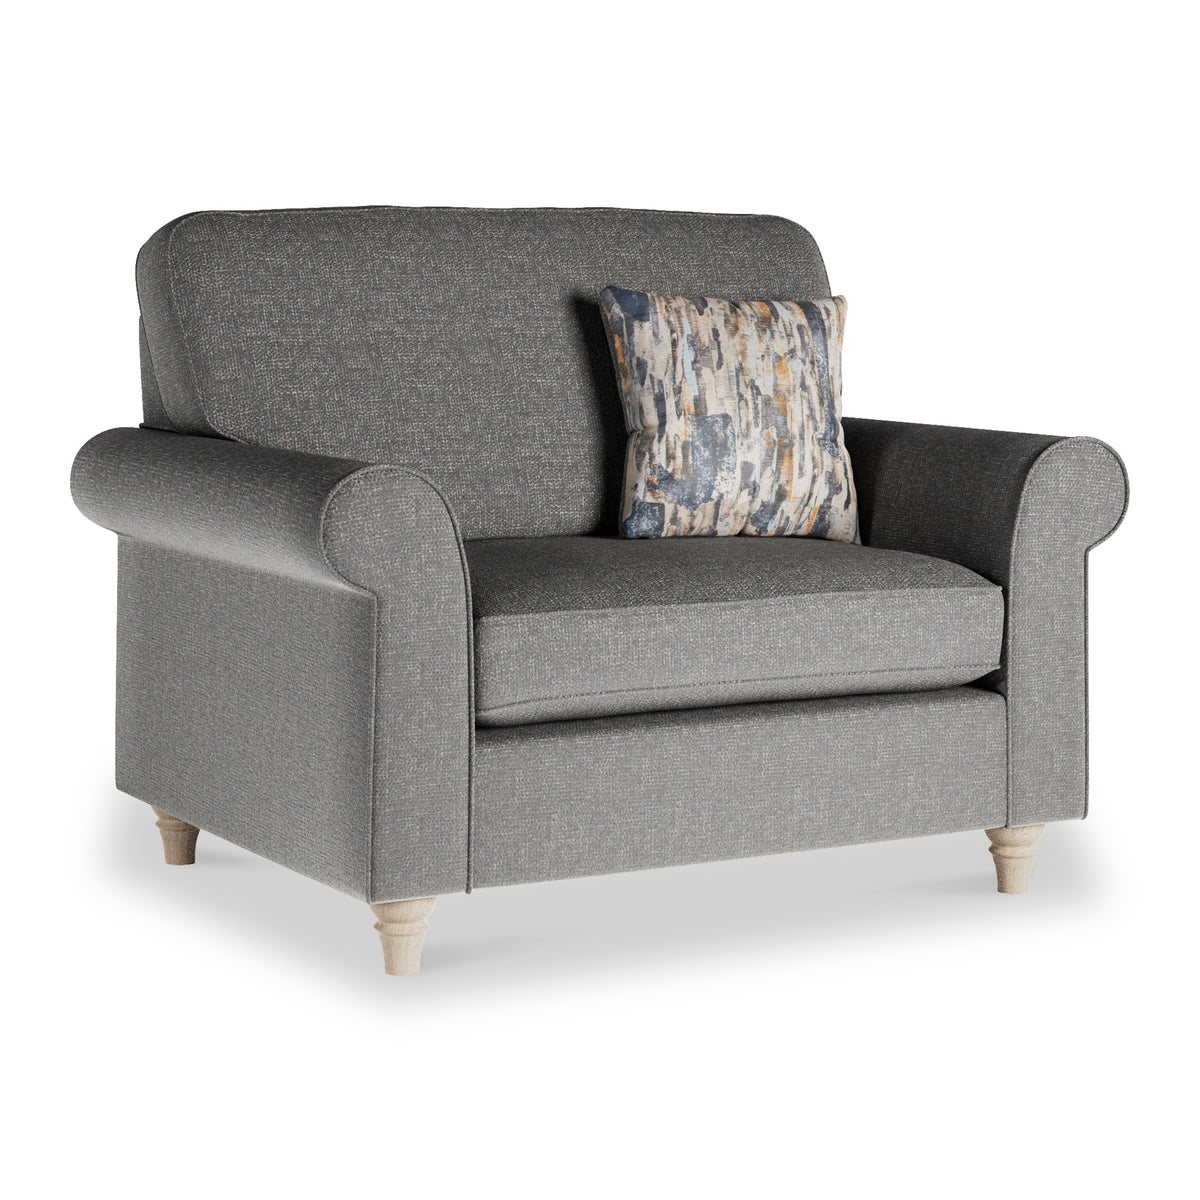 Jude Coal Snuggle Armchair from Roseland Furniture